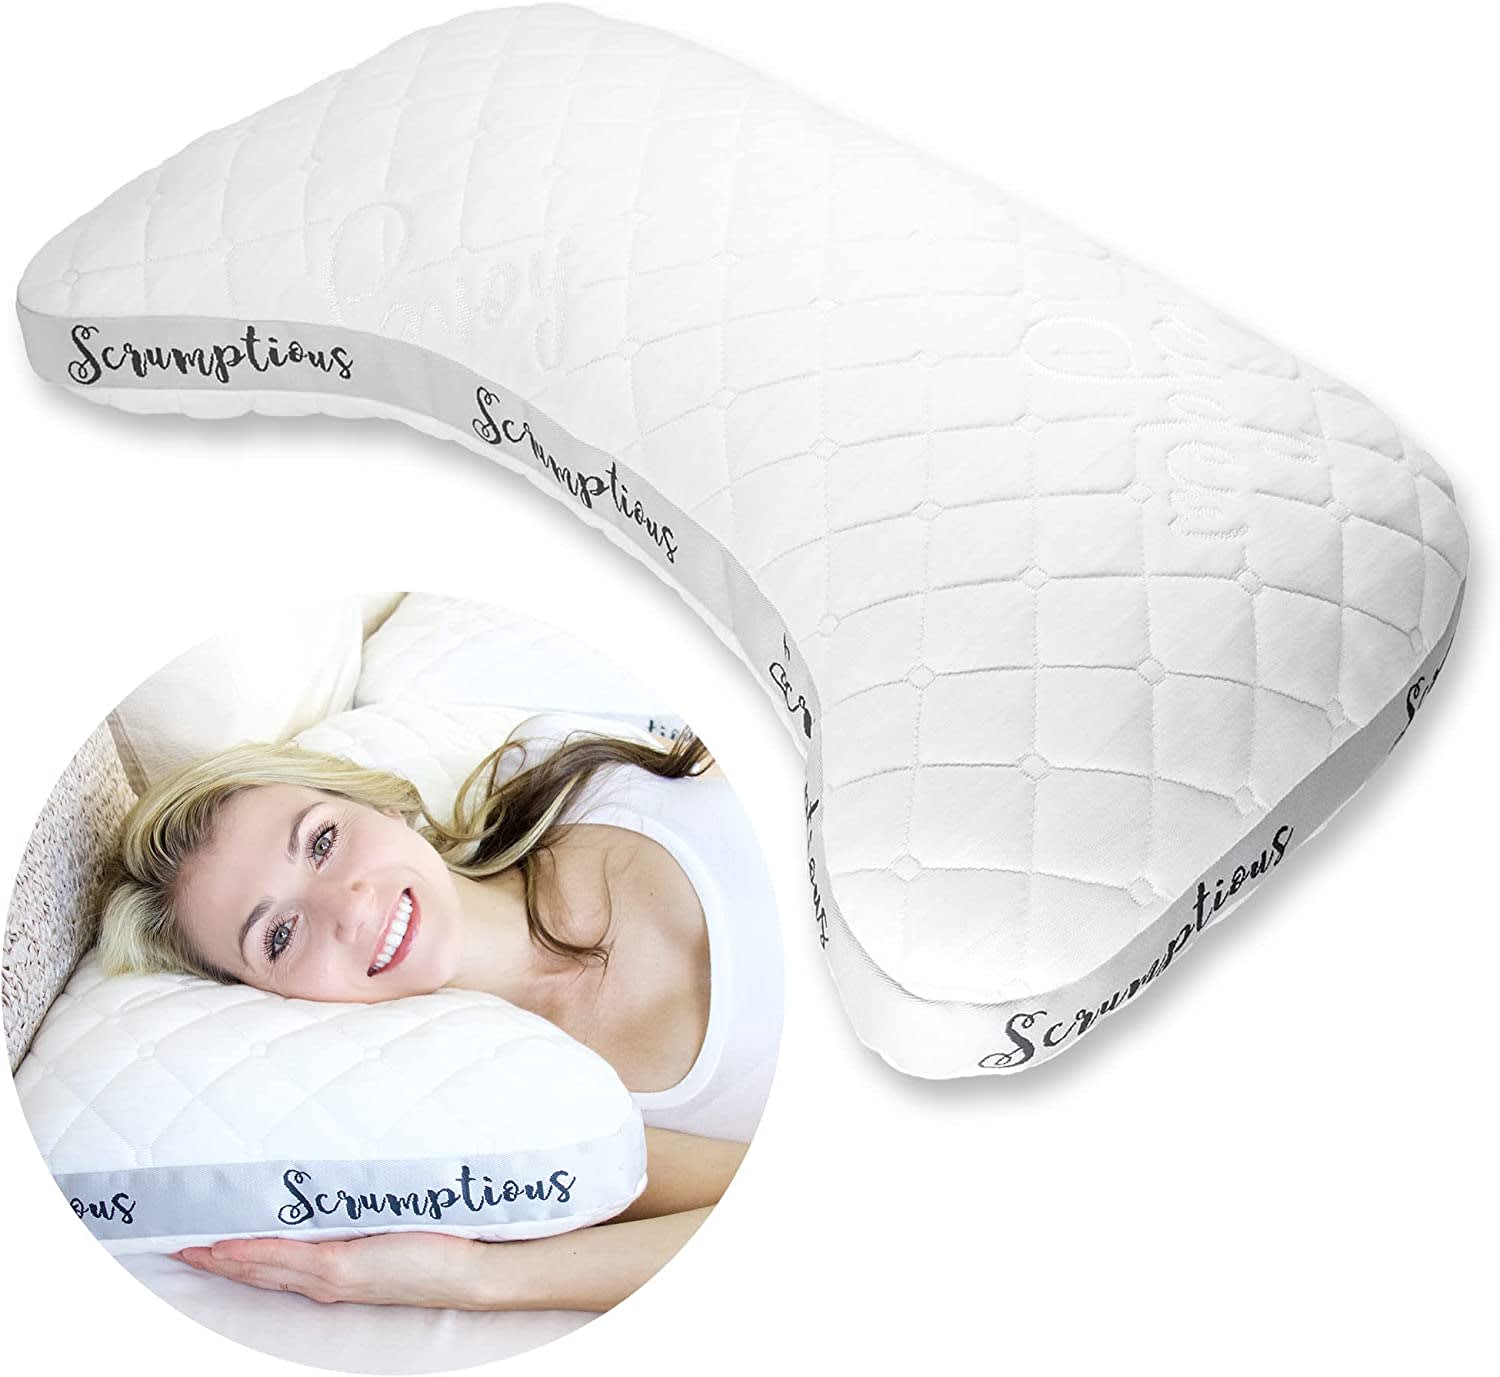 Sleep Better with BackJoy Posture Sleep Pillow {Review} - With Our Best -  Denver Lifestyle Blog